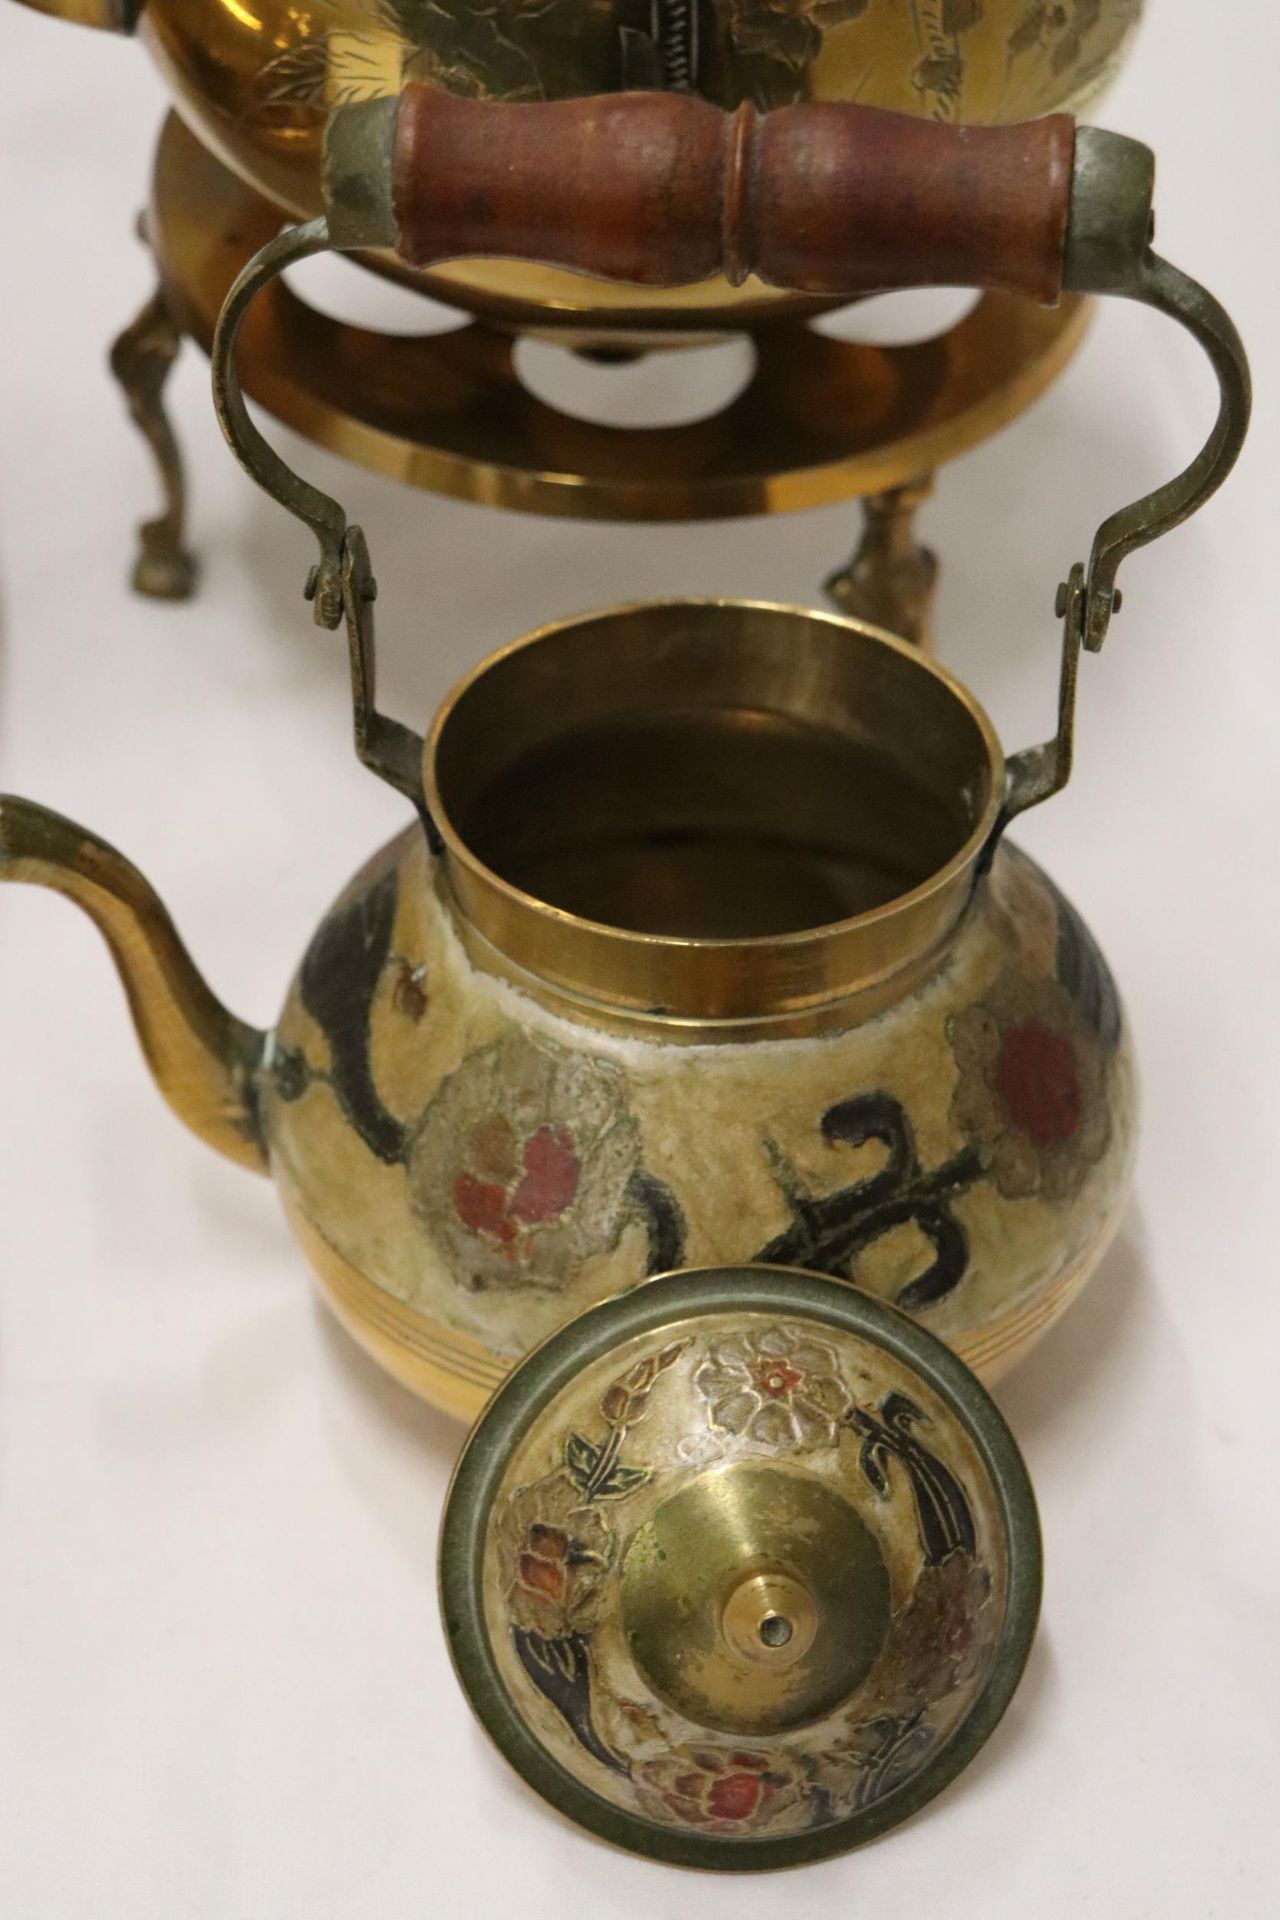 TWO BRASS KETTLES, A CLOISONNE KETTLE AND A TRIVET - Image 8 of 8